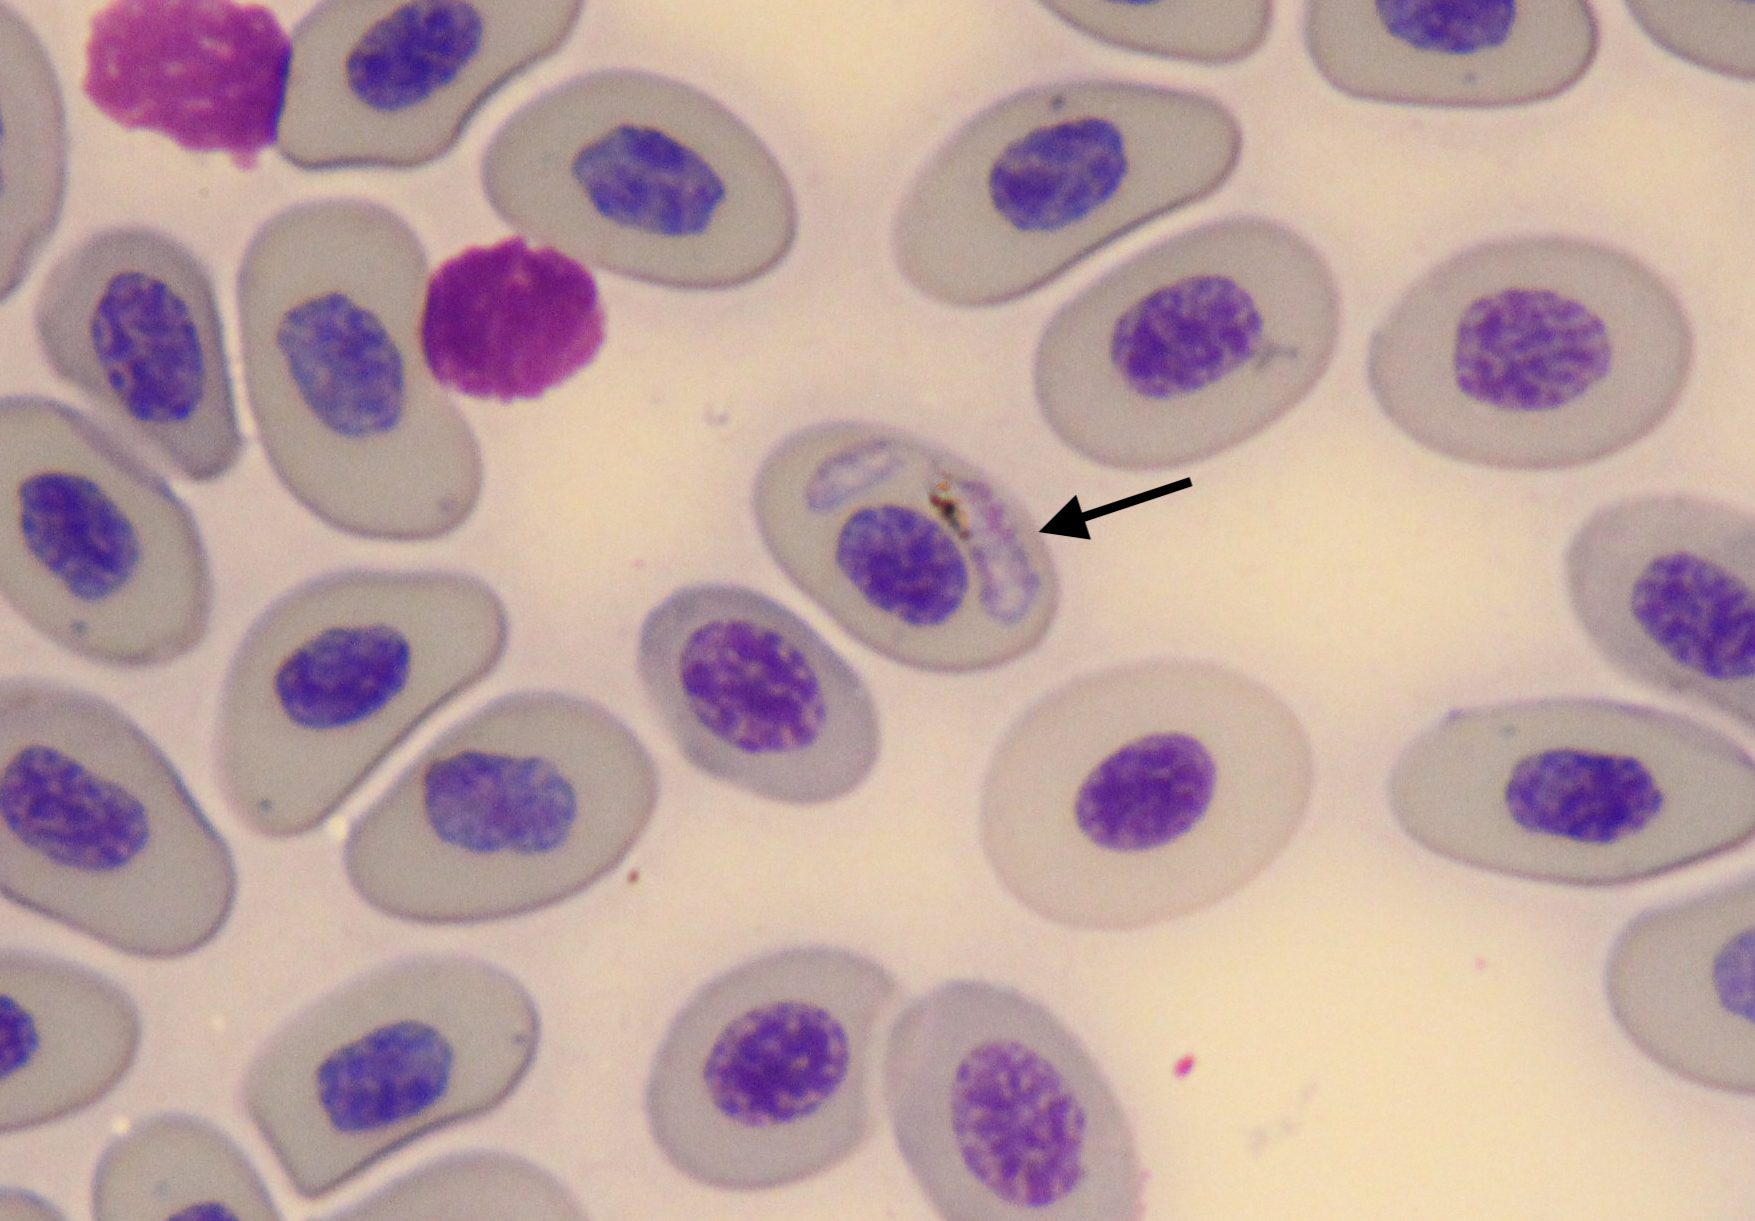 Slide showing a red blood cell infected with lizard malaria. Photo by Ari Torres.